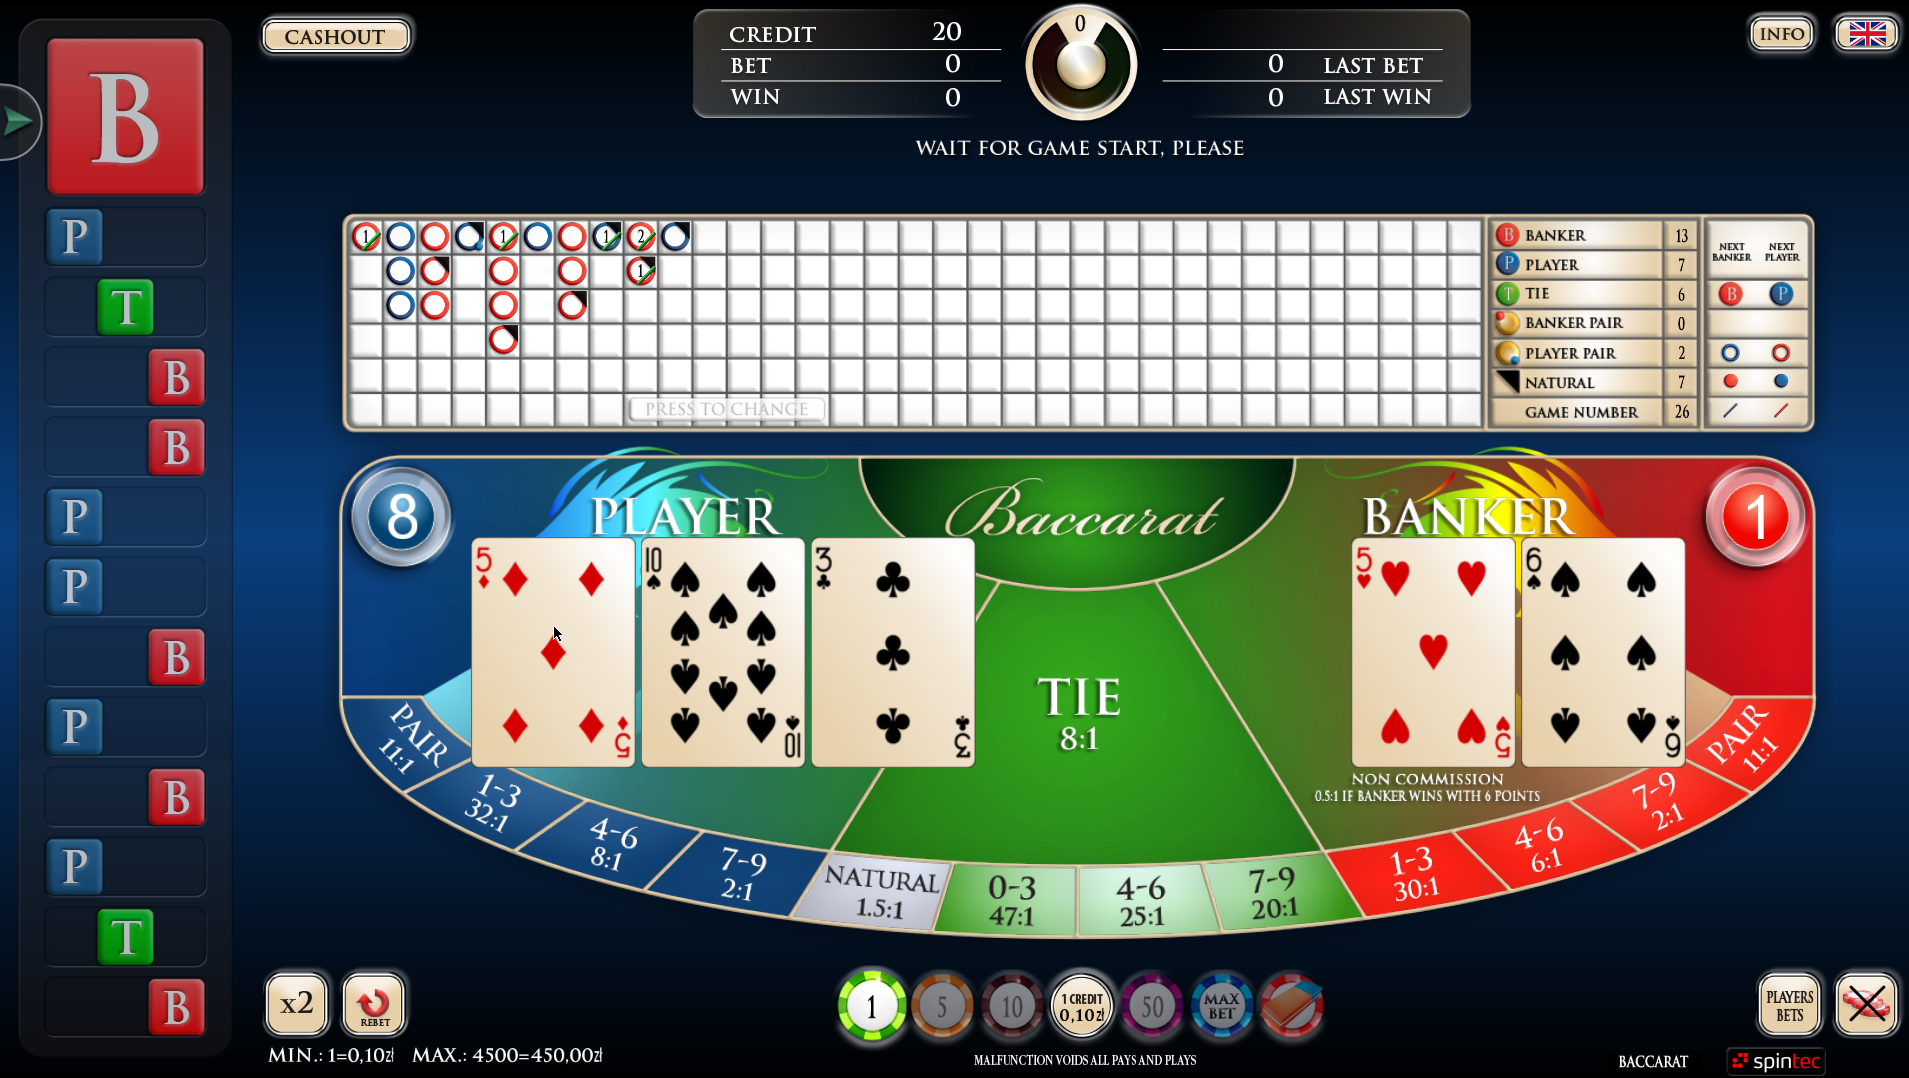 No Of Things That Can Come In Handy While Playing Online Baccarat!